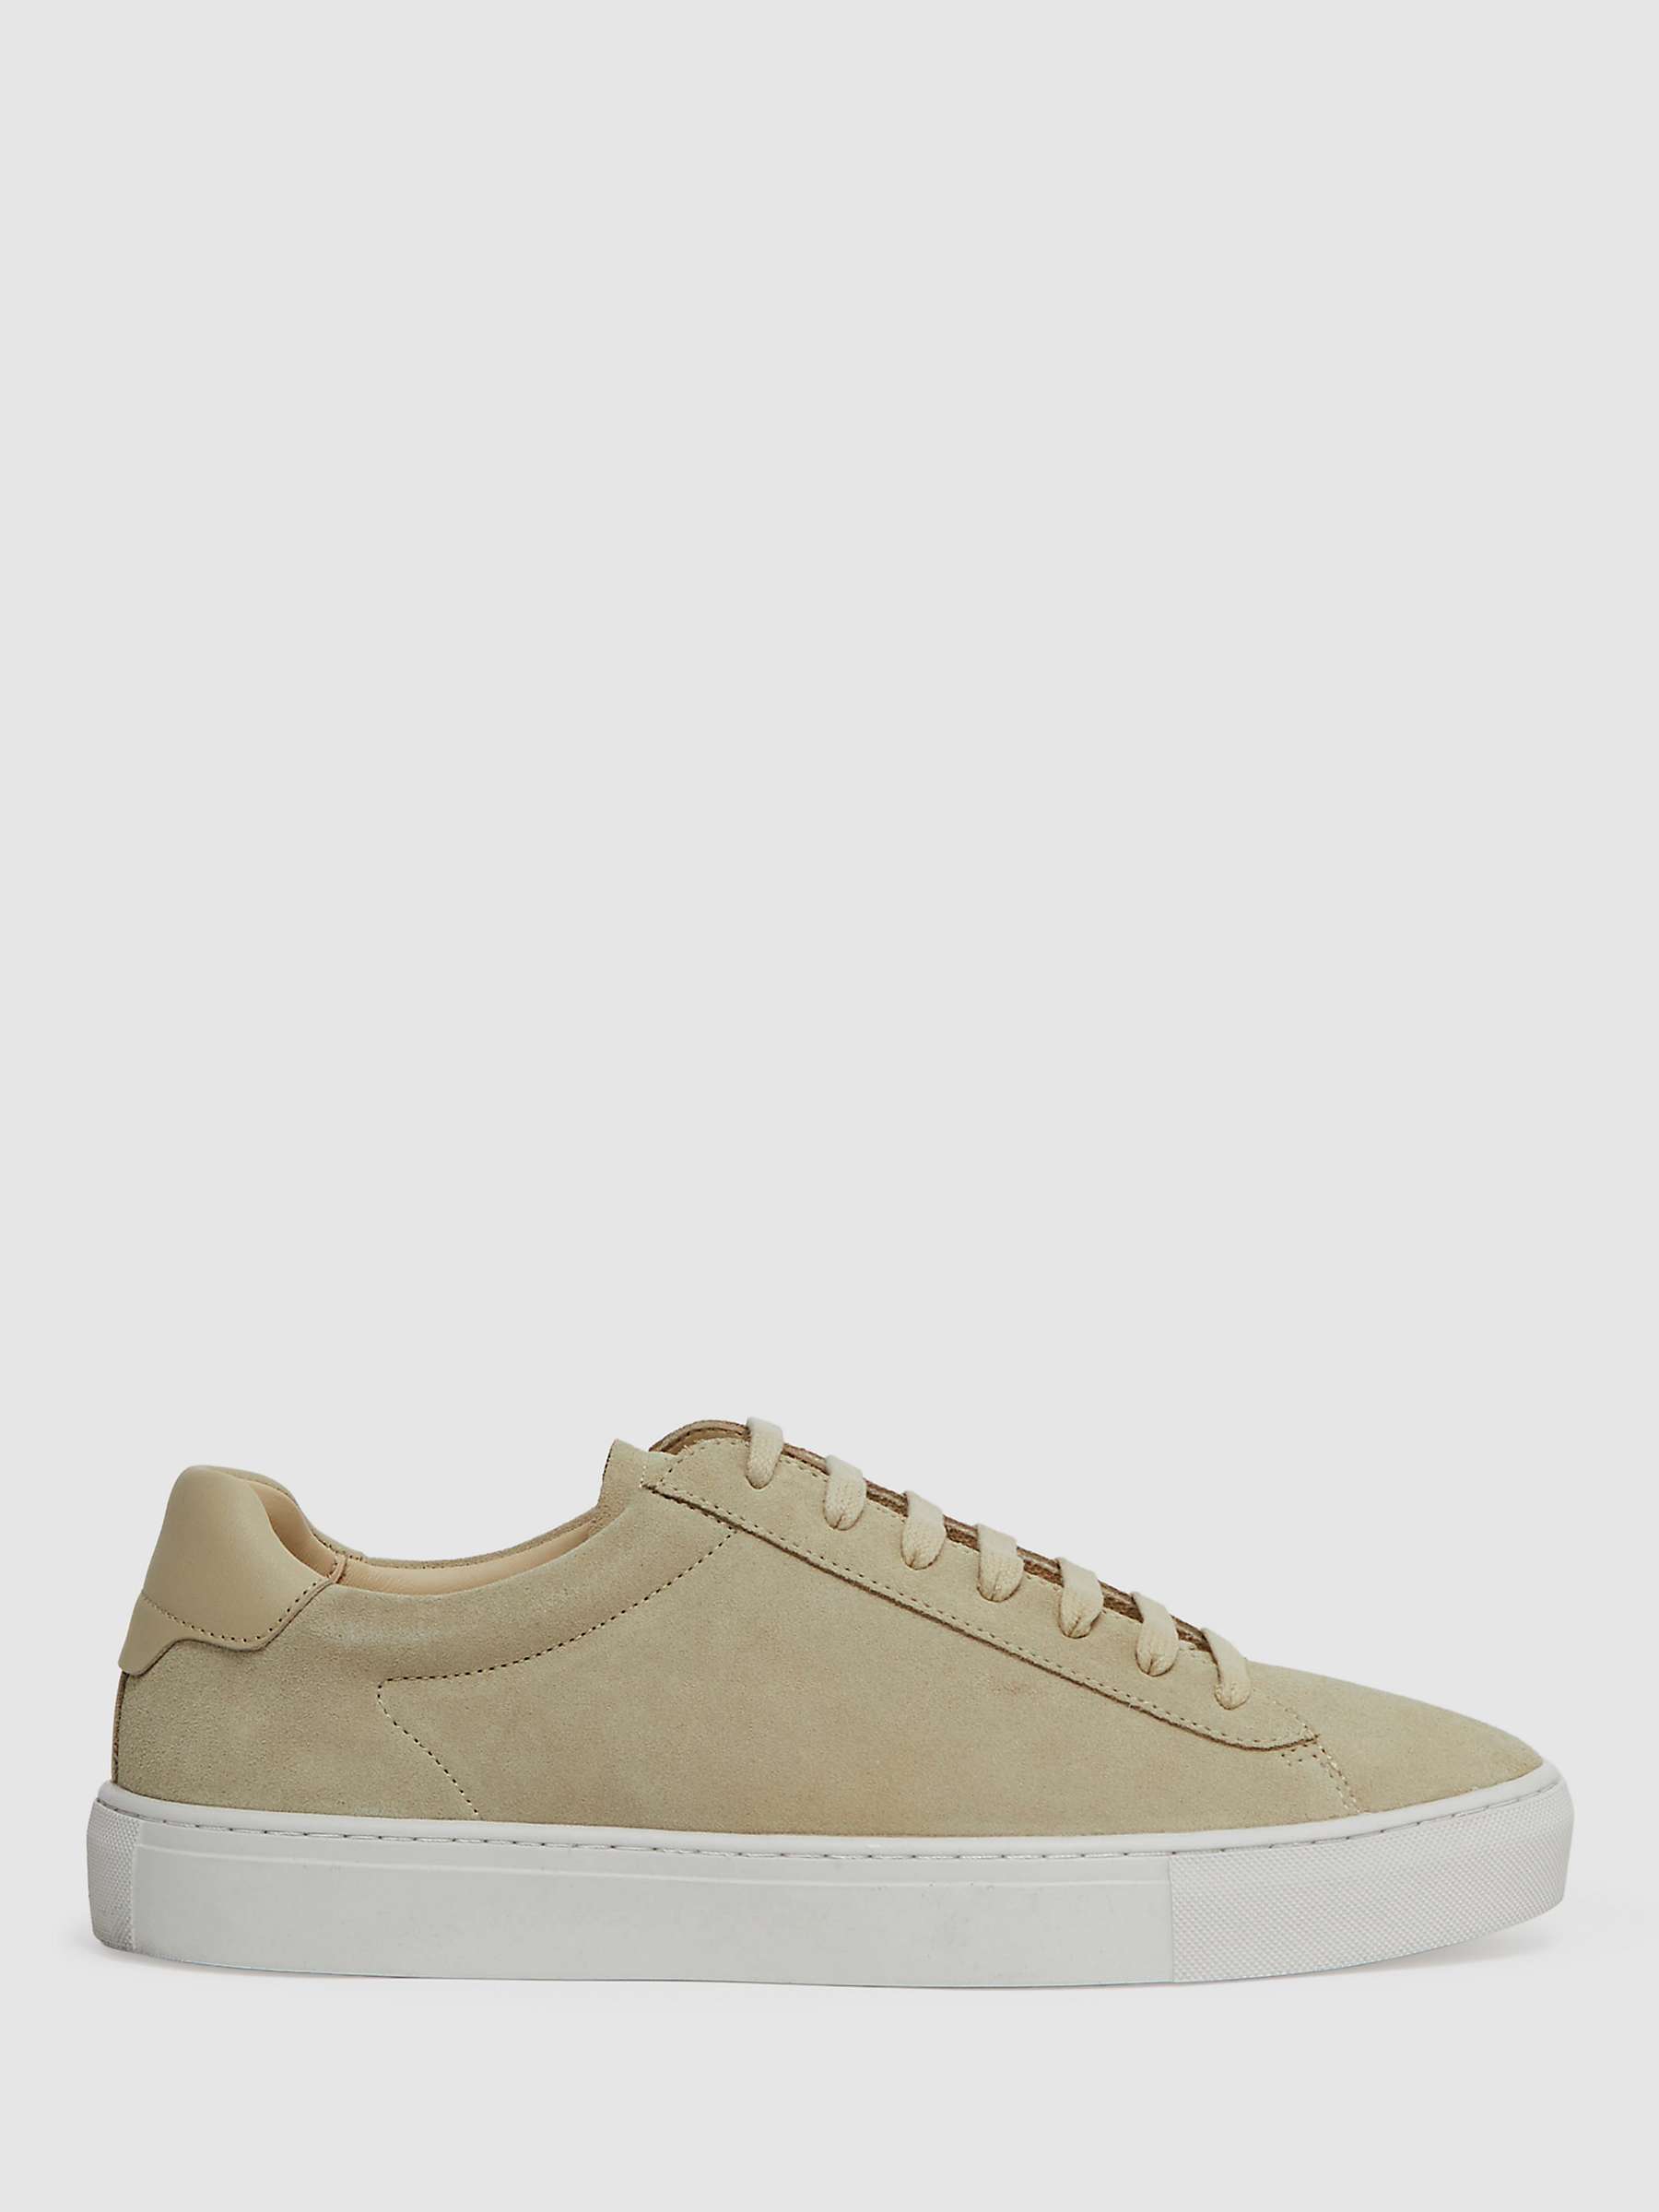 Reiss Finley Suede Lace Up Trainers, Stone at John Lewis & Partners